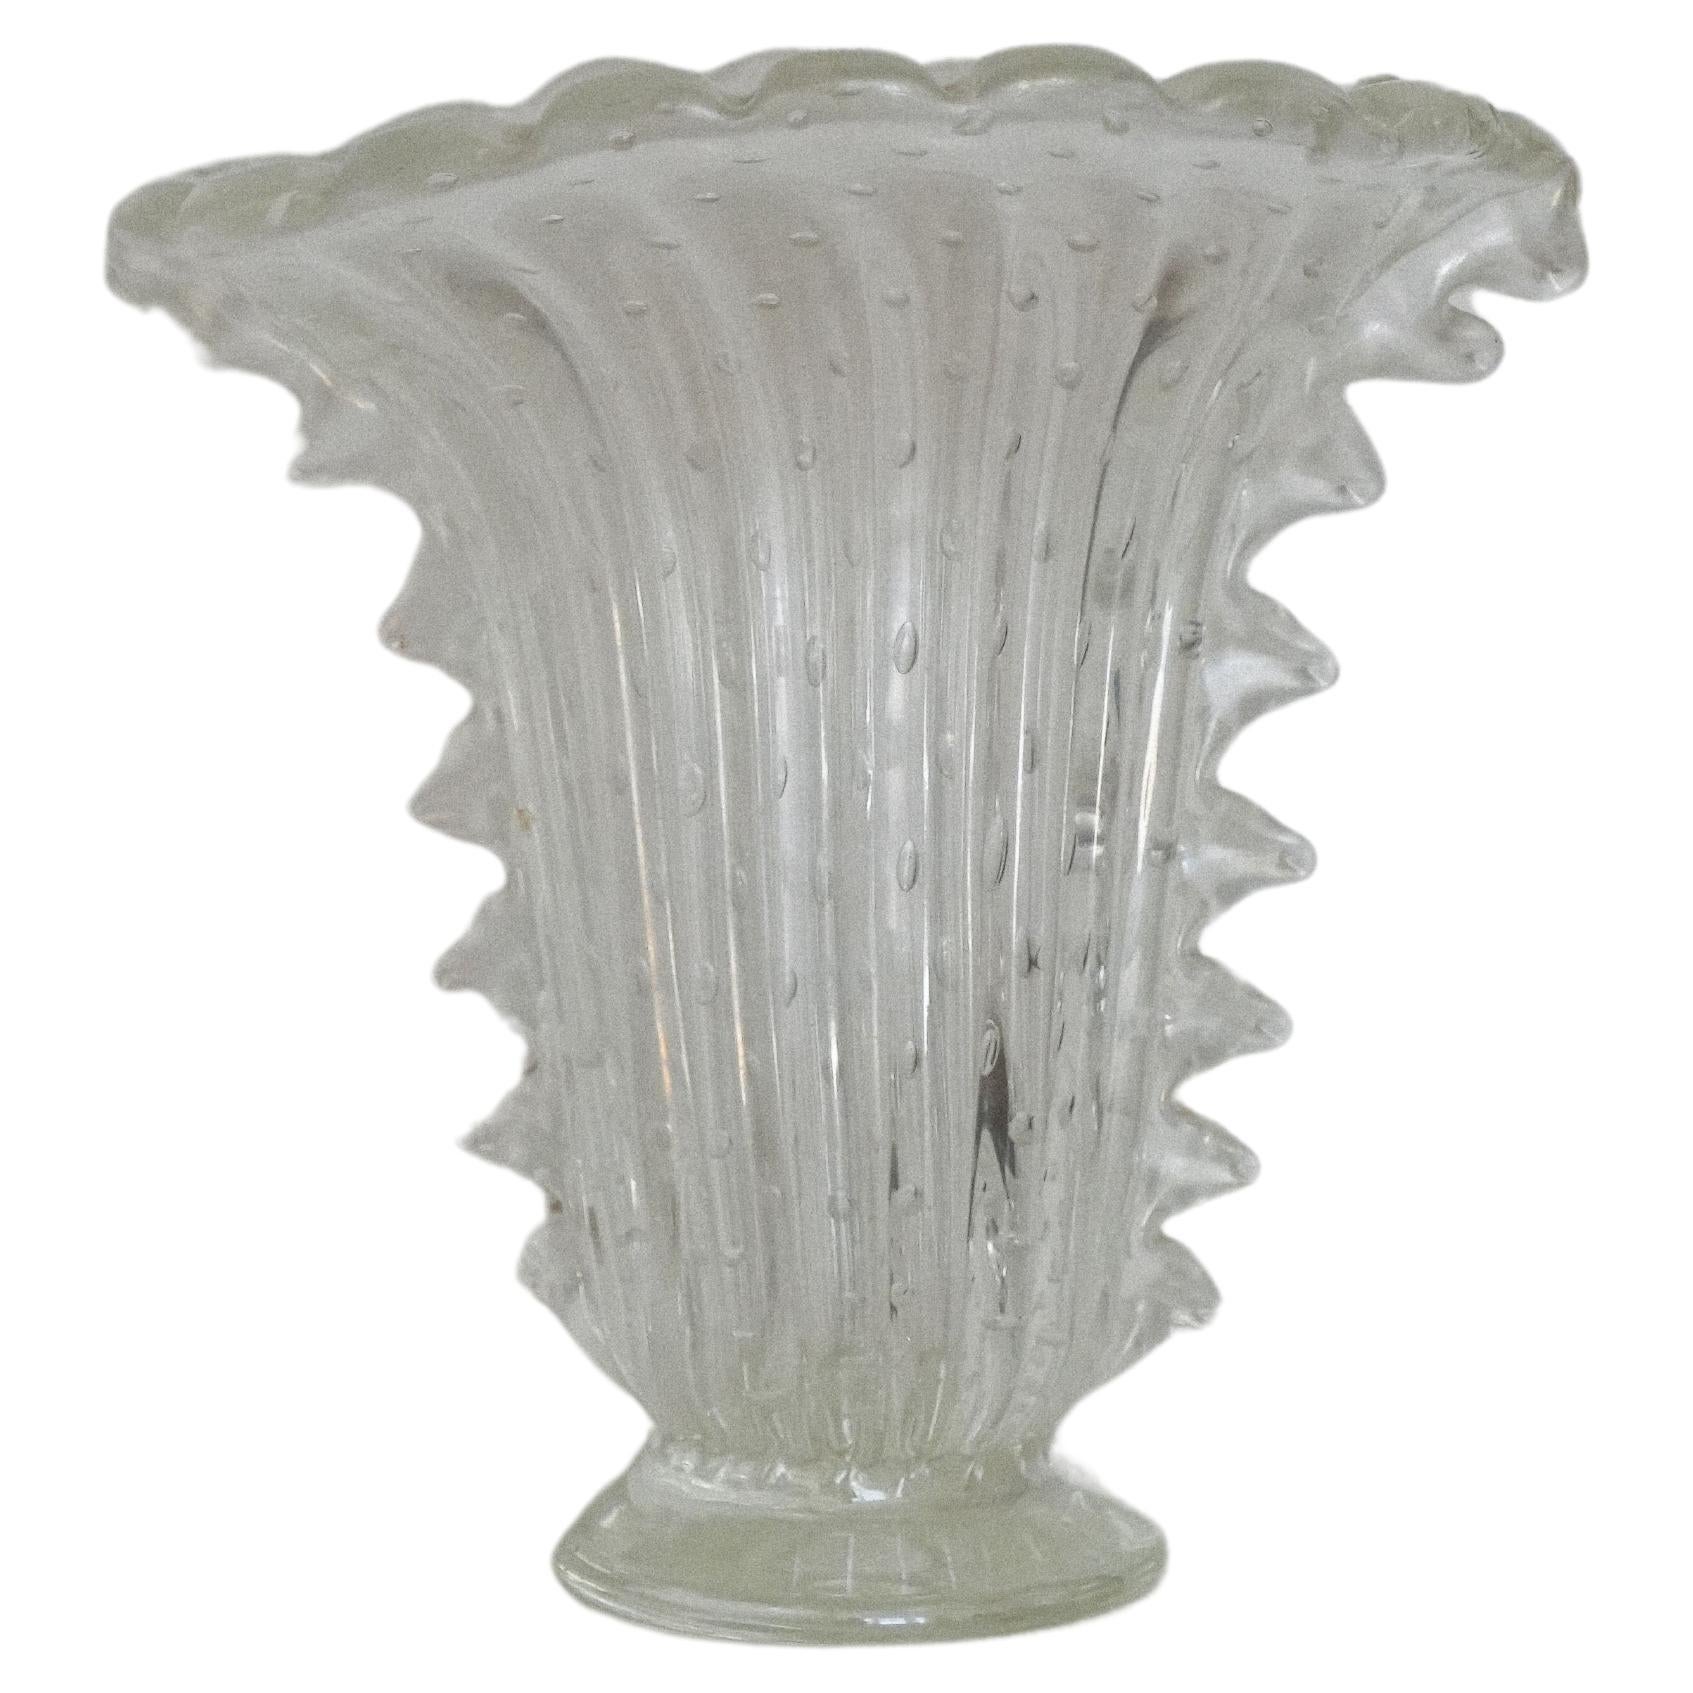 Large Murano Bullicante Vase by Barovier & Toso, c.1940s For Sale